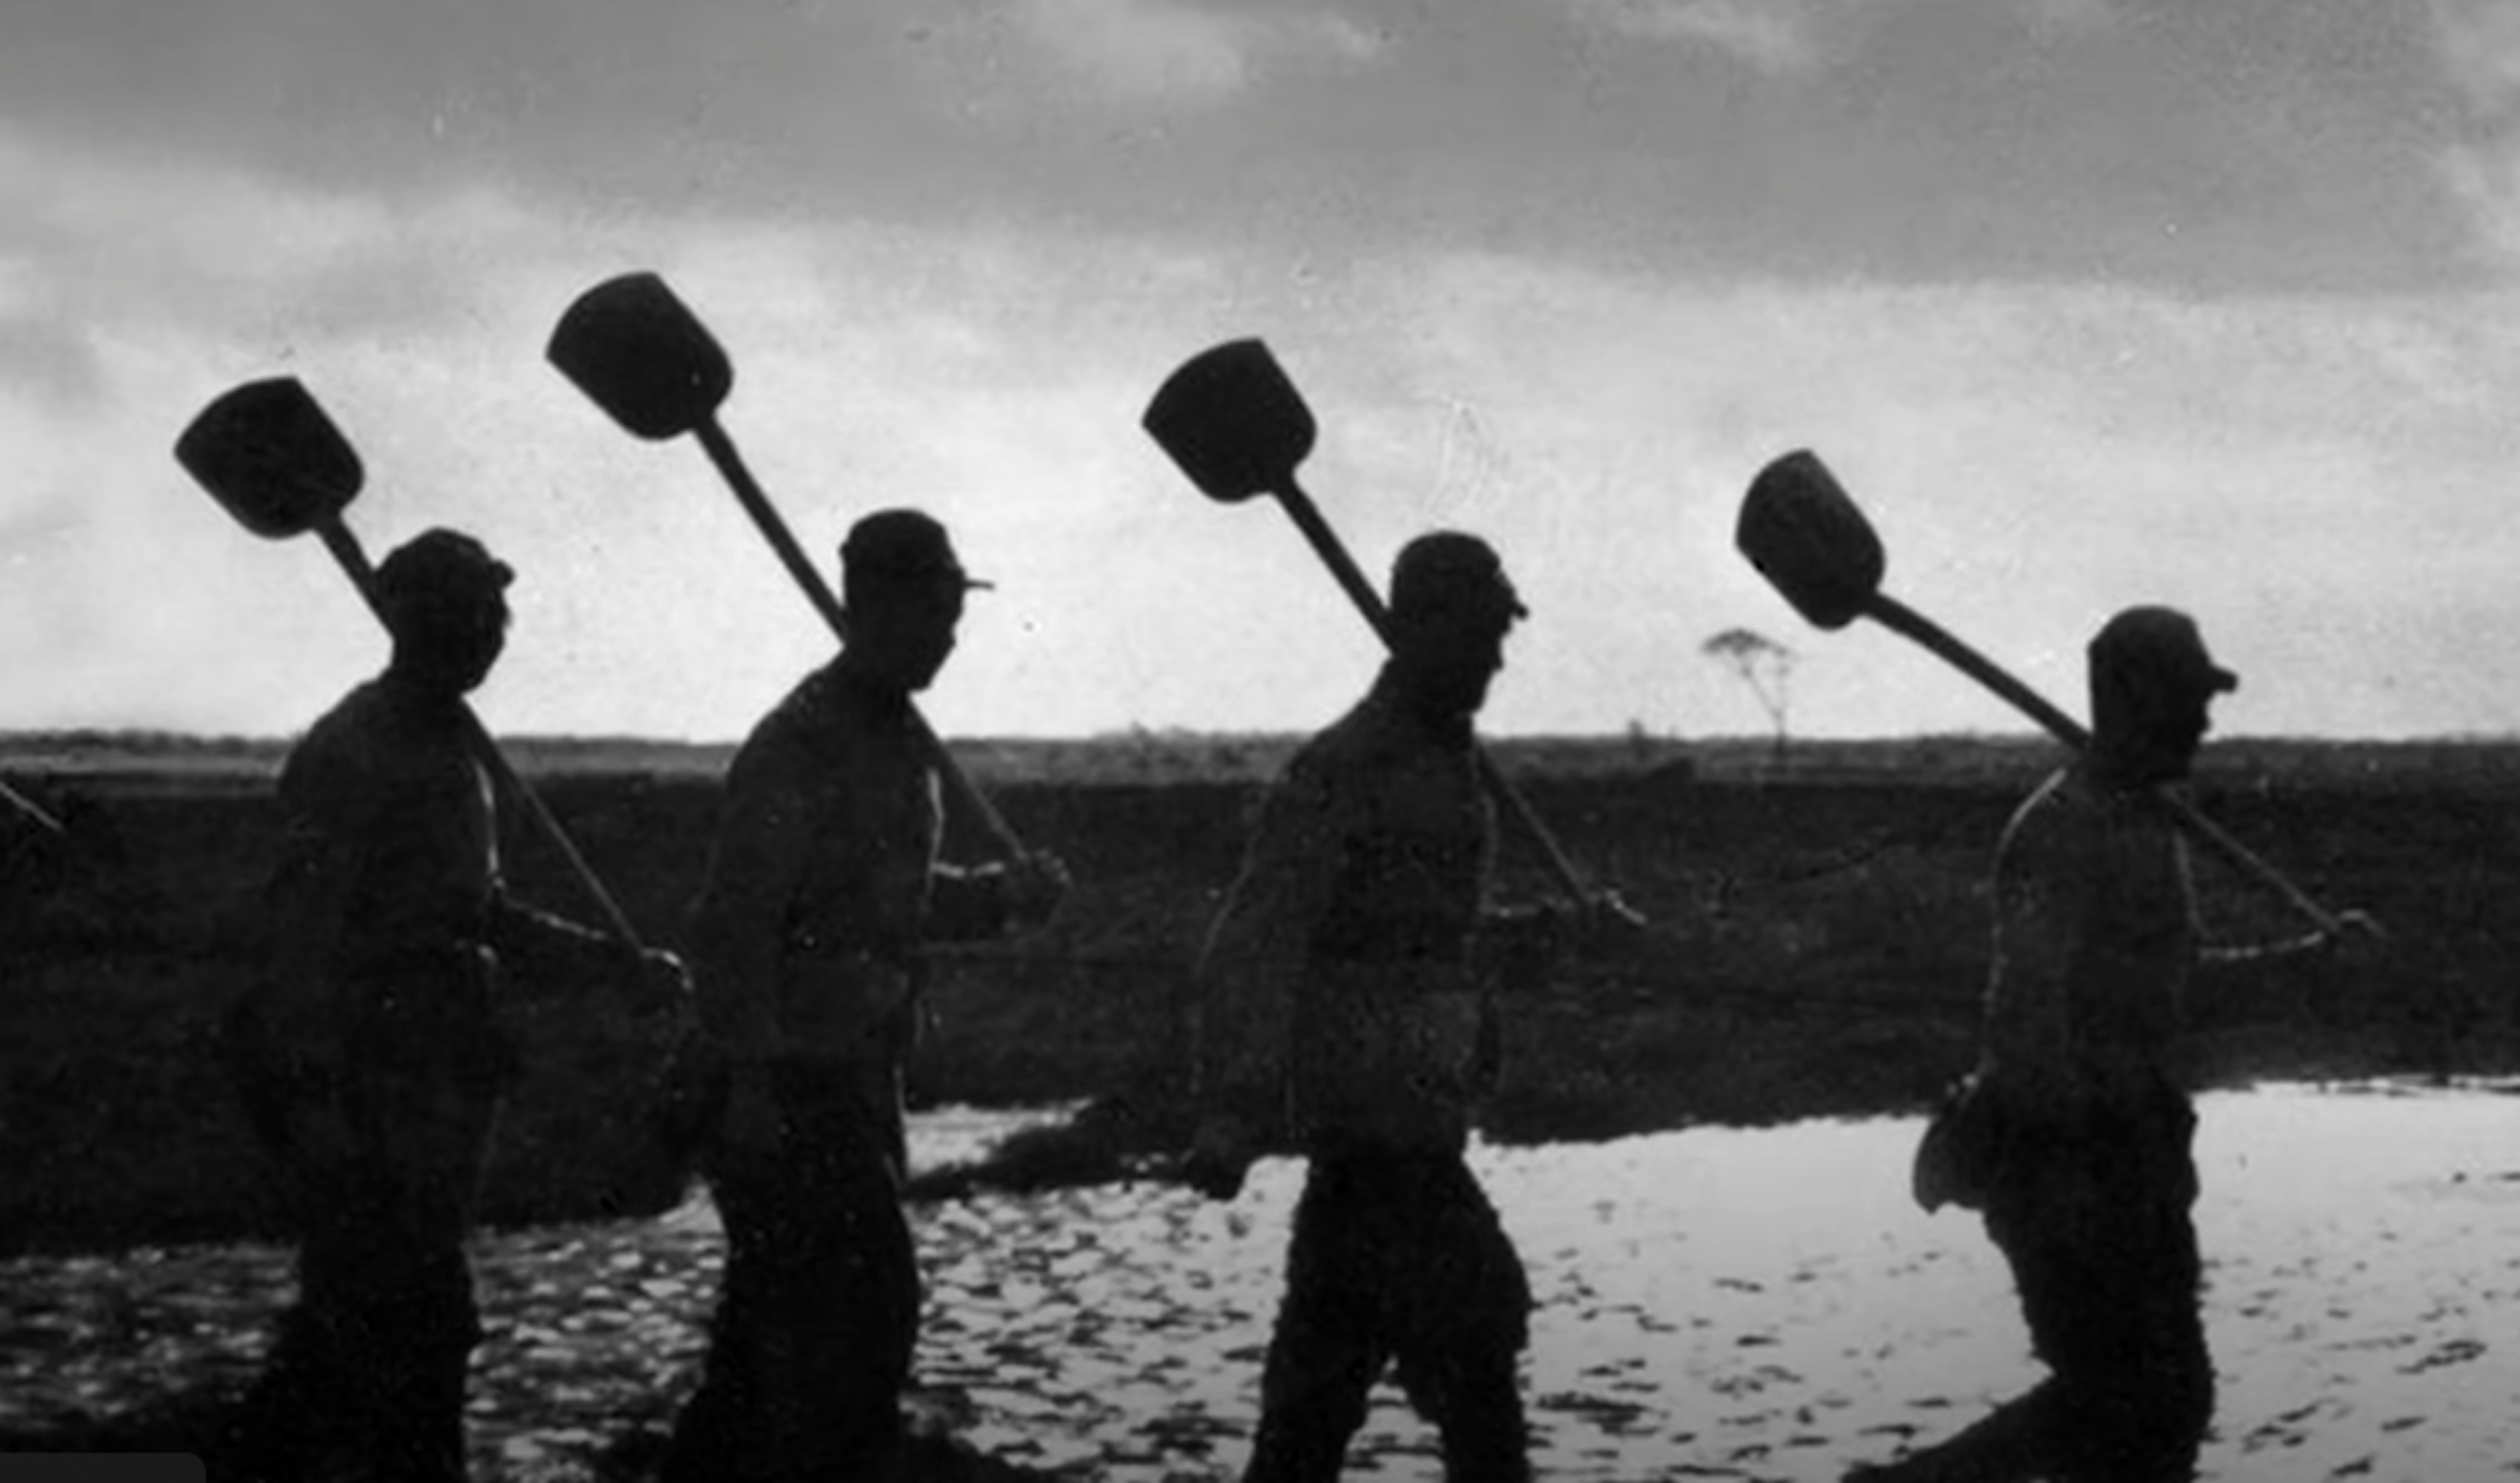 A group of men with shovels over their shoulders marching in a line silhouetted against the sky.